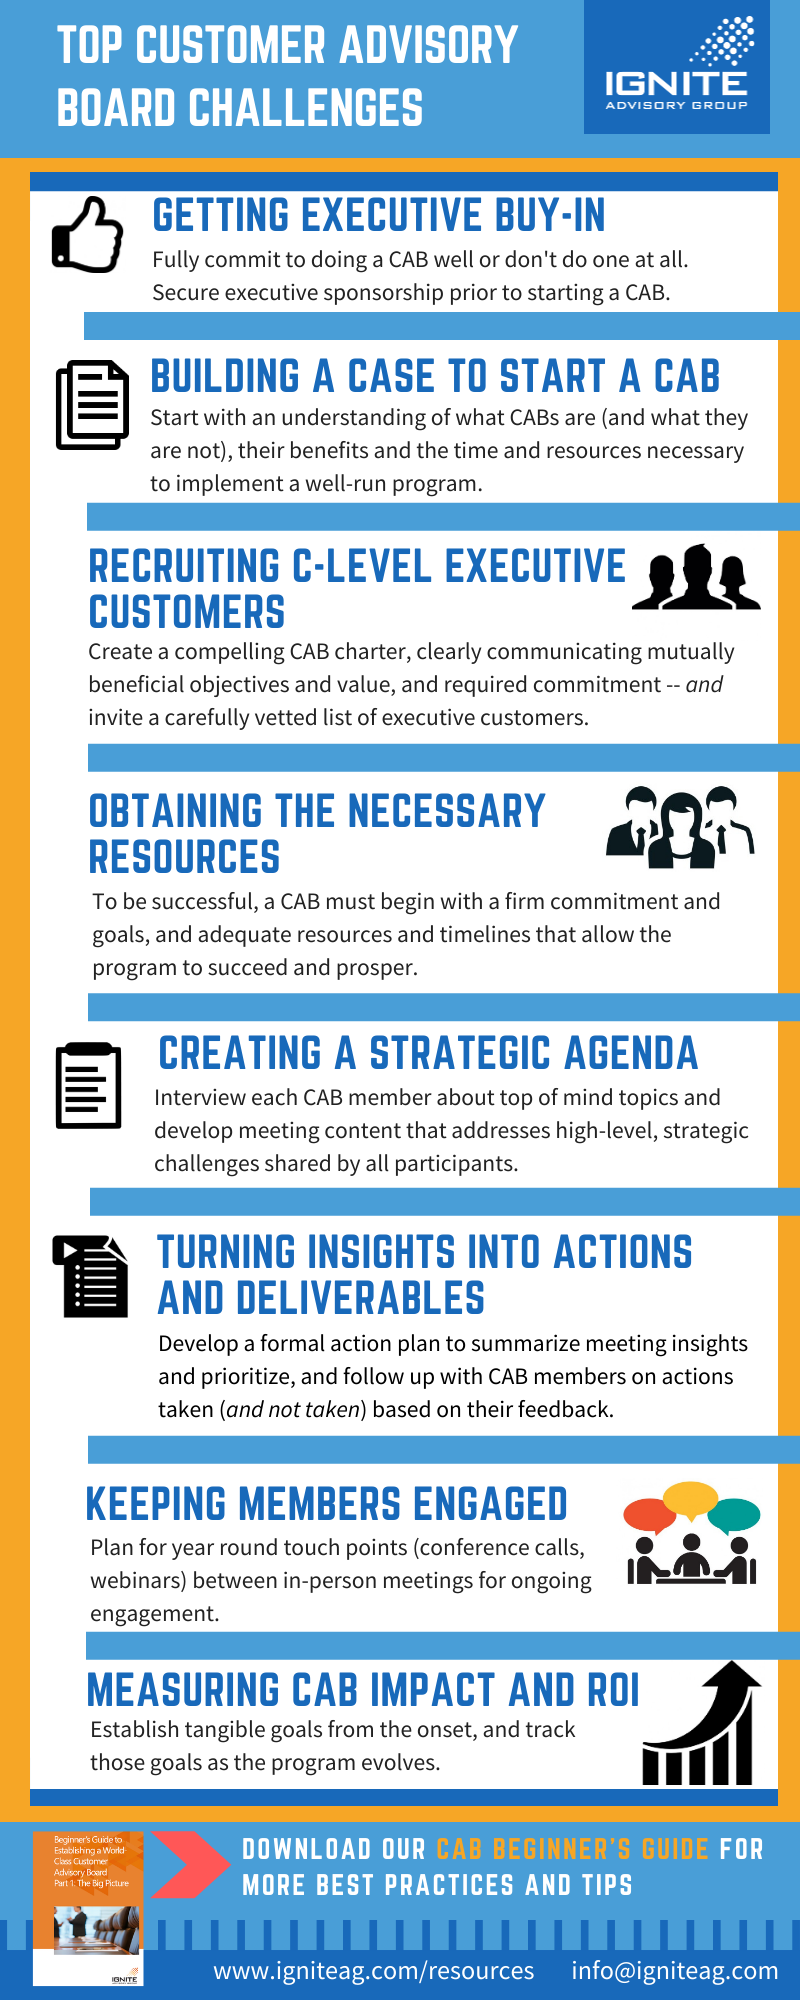 Top Customer Advisory Board Challenges Infographic